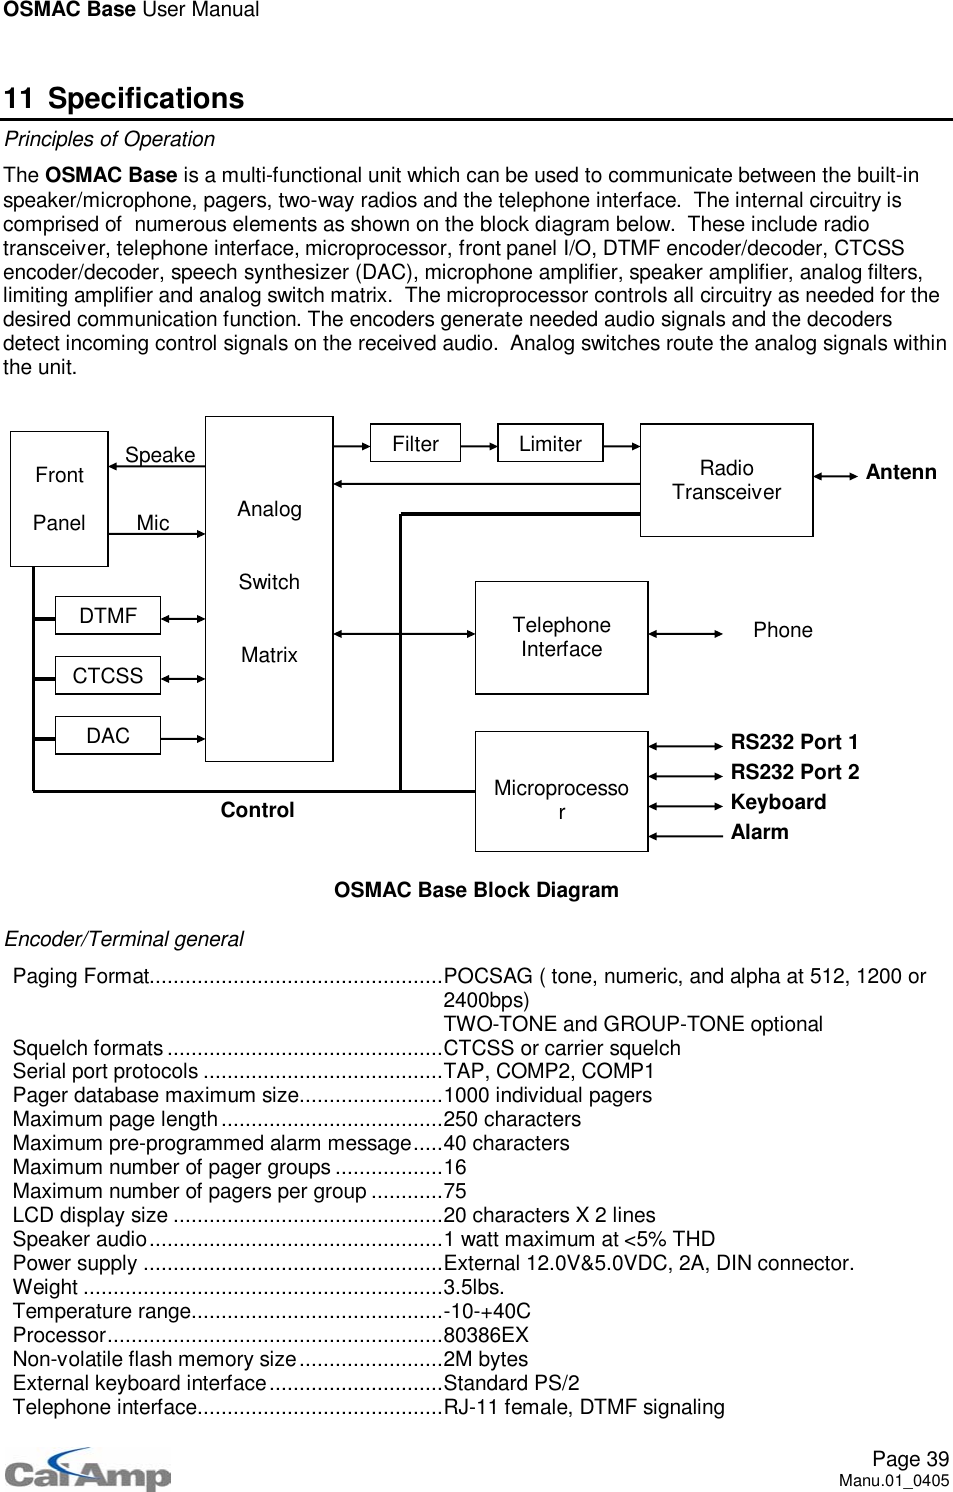 OSMAC Base User ManualPage 39Manu.01_040511 SpecificationsPrinciples of OperationThe OSMAC Base is a multi-functional unit which can be used to communicate between the built-inspeaker/microphone, pagers, two-way radios and the telephone interface. The internal circuitry iscomprised of numerous elements as shown on the block diagram below. These include radiotransceiver, telephone interface, microprocessor, front panel I/O, DTMF encoder/decoder, CTCSSencoder/decoder, speech synthesizer (DAC), microphone amplifier, speaker amplifier, analog filters,limiting amplifier and analog switch matrix. The microprocessor controls all circuitry as needed for thedesired communication function. The encoders generate needed audio signals and the decodersdetect incoming control signals on the received audio. Analog switches route the analog signals withinthe unit.OSMAC Base Block DiagramEncoder/Terminal generalPaging Format.................................................POCSAG ( tone, numeric, and alpha at 512, 1200 or2400bps)TWO-TONE and GROUP-TONE optionalSquelch formats ..............................................CTCSS or carrier squelchSerial port protocols ........................................TAP, COMP2, COMP1Pager database maximum size........................1000 individual pagersMaximum page length.....................................250 charactersMaximum pre-programmed alarm message.....40 charactersMaximum number of pager groups ..................16Maximum number of pagers per group ............75LCD display size .............................................20 characters X 2 linesSpeaker audio.................................................1 watt maximum at &lt;5% THDPower supply ..................................................External 12.0V&amp;5.0VDC, 2A, DIN connector.Weight ............................................................3.5lbs.Temperature range..........................................-10-+40CProcessor........................................................80386EXNon-volatile flash memory size........................2M bytesExternal keyboard interface.............................Standard PS/2Telephone interface.........................................RJ-11 female, DTMF signalingSpeakeMicControlAntennAnalogSwitchMatrixRadioTransceiverFrontPanelFilterLimiterTelephoneInterfacePhoneDTMFCTCSSDACMicroprocessorRS232 Port 1RS232 Port 2KeyboardAlarm